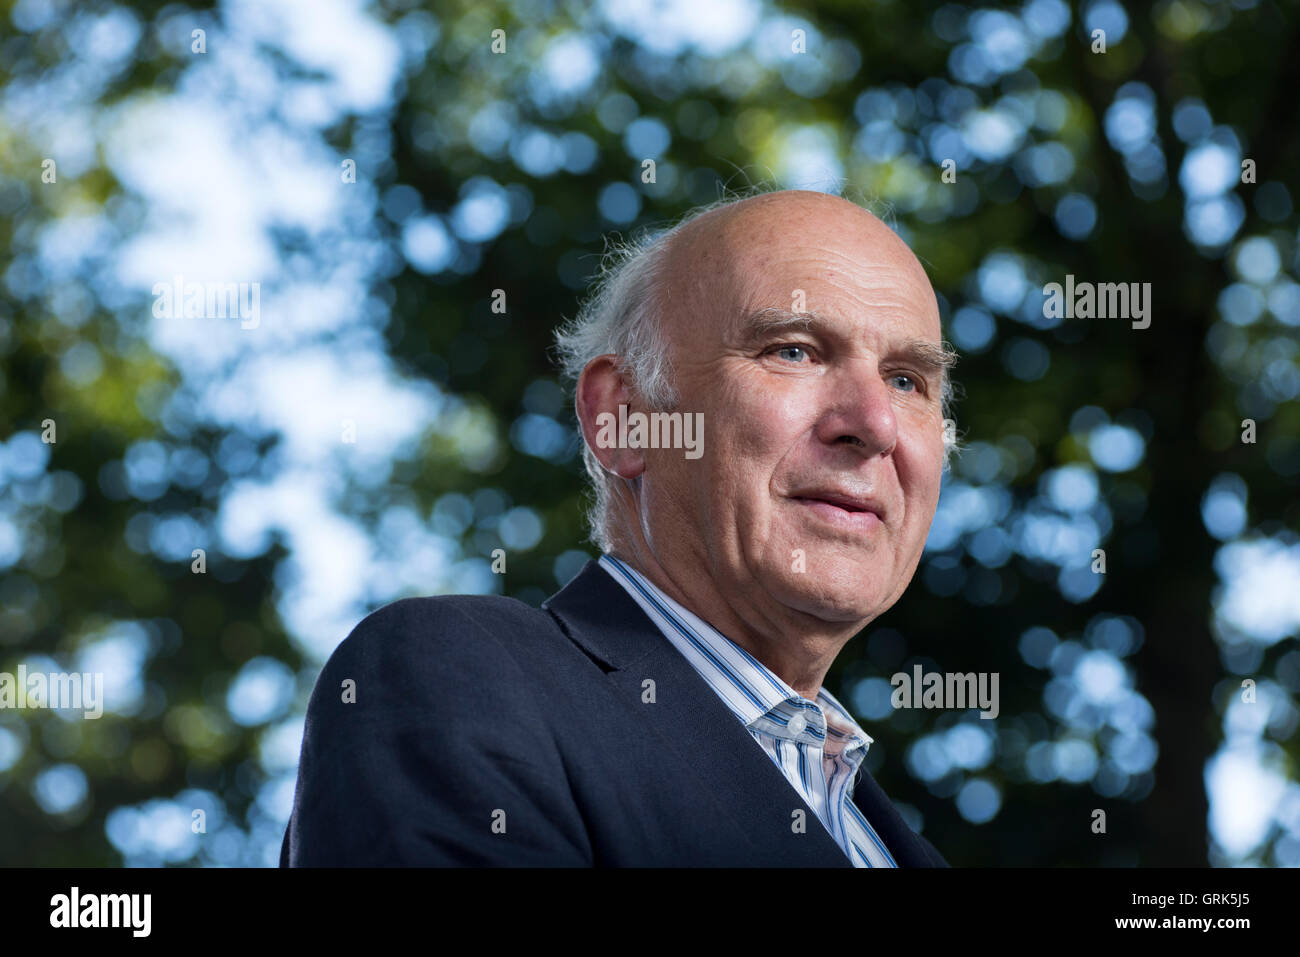 British politician and Former Secretary of State for Business, Innovation and Skills Vince Cable. Stock Photo